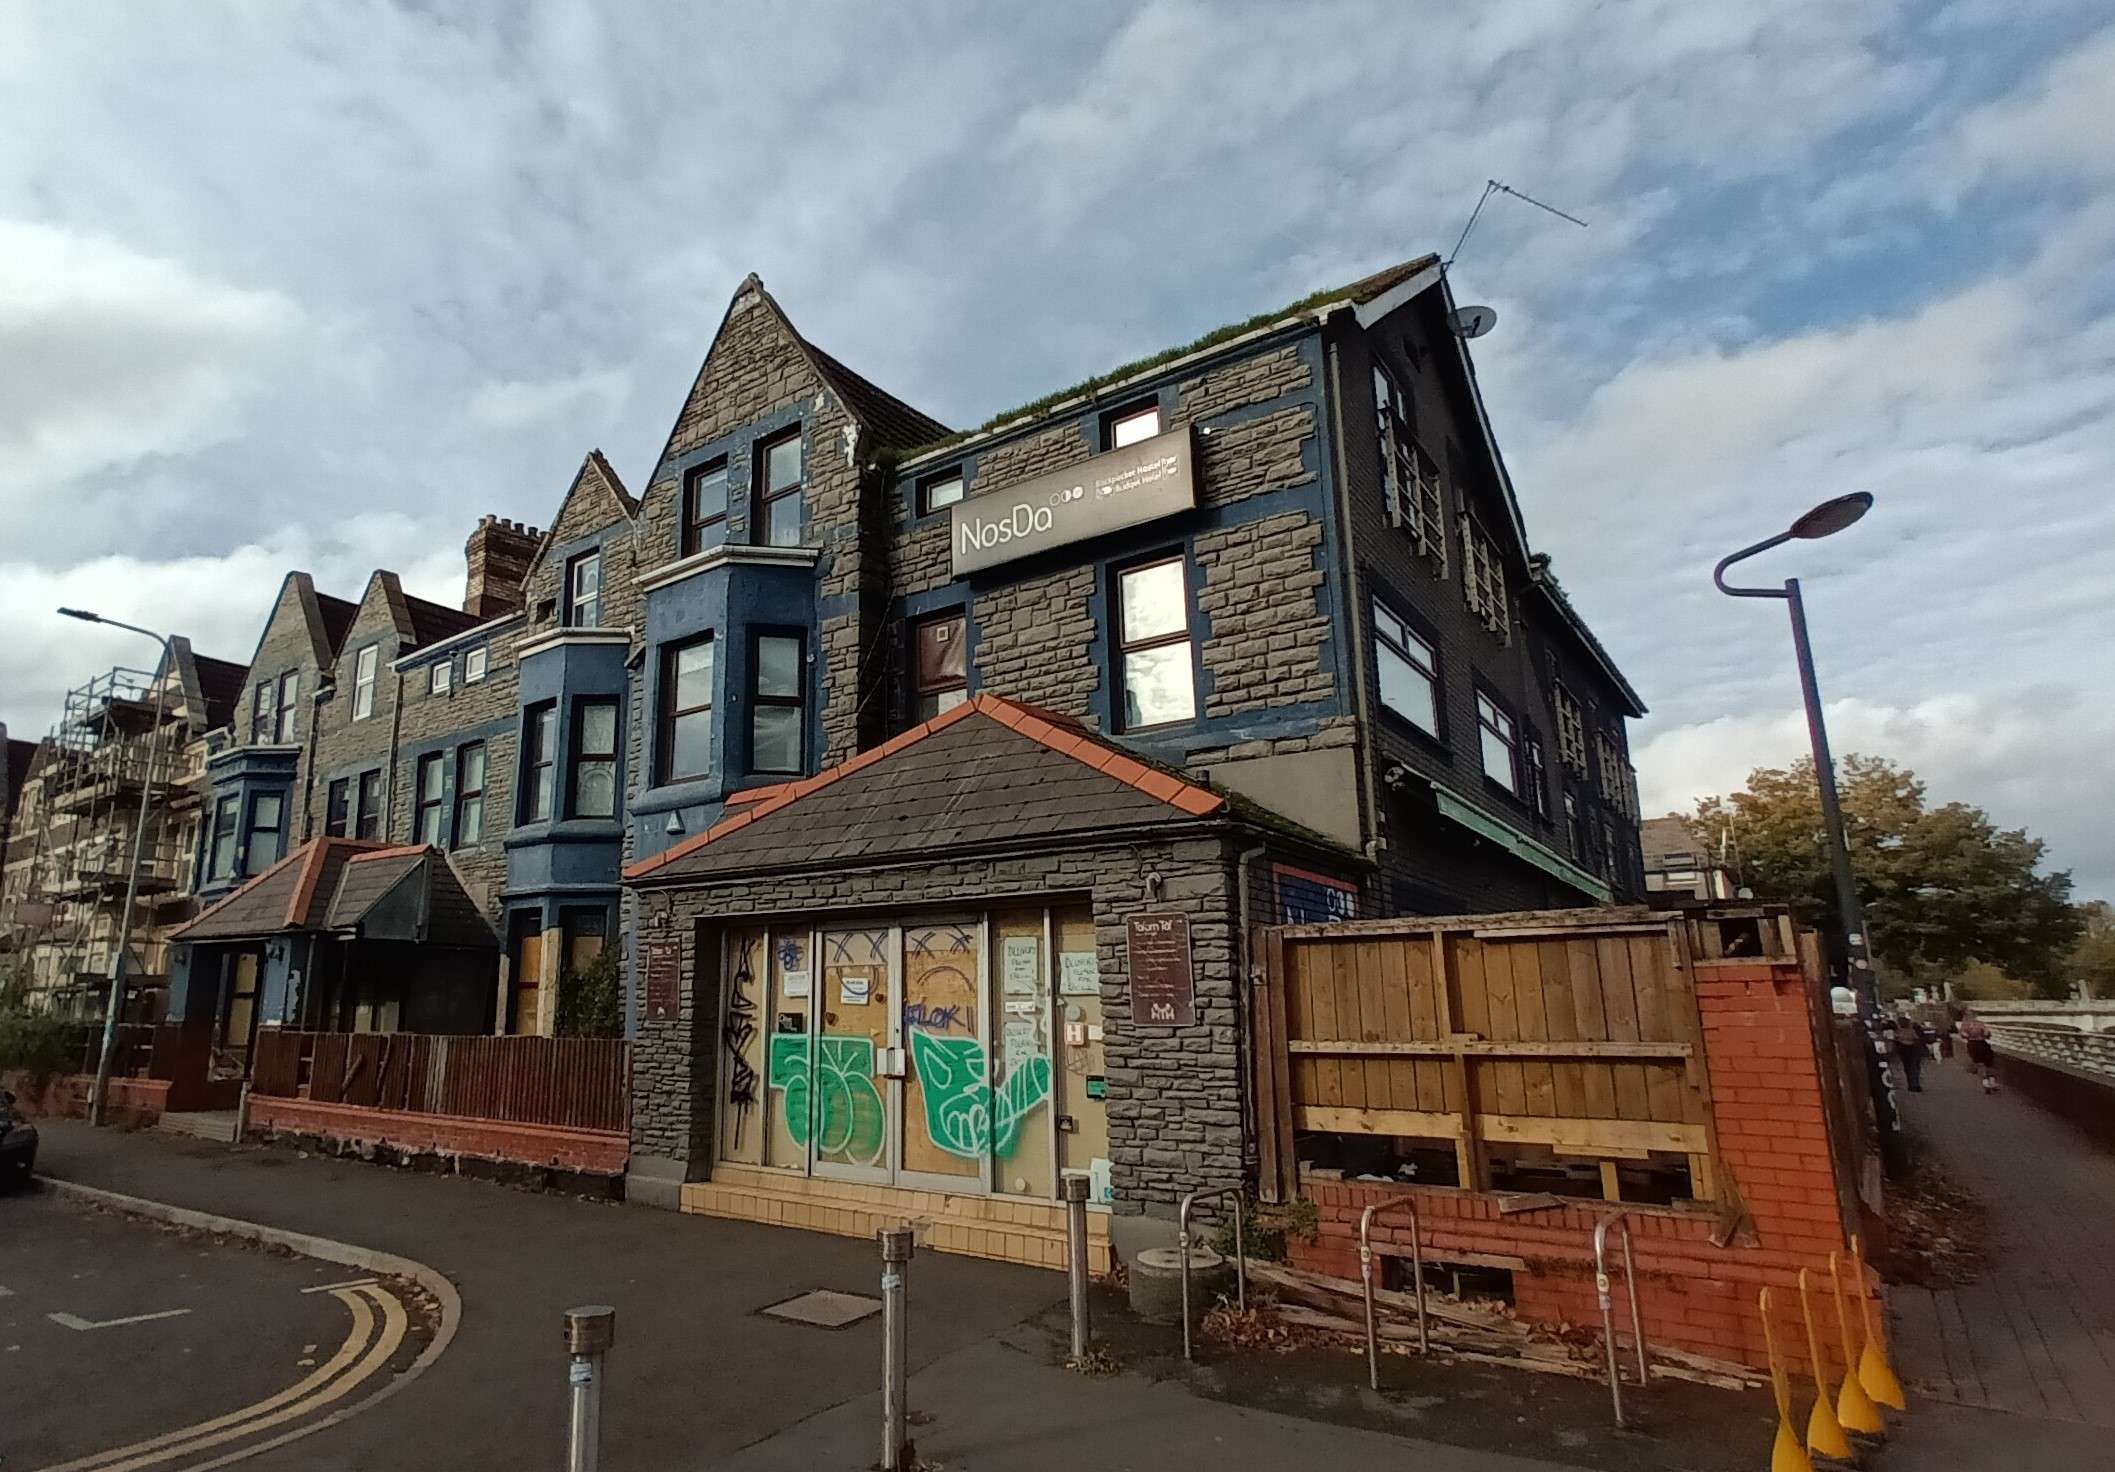 Owners of former Cardiff hostel announce plans to revive building as an Inn